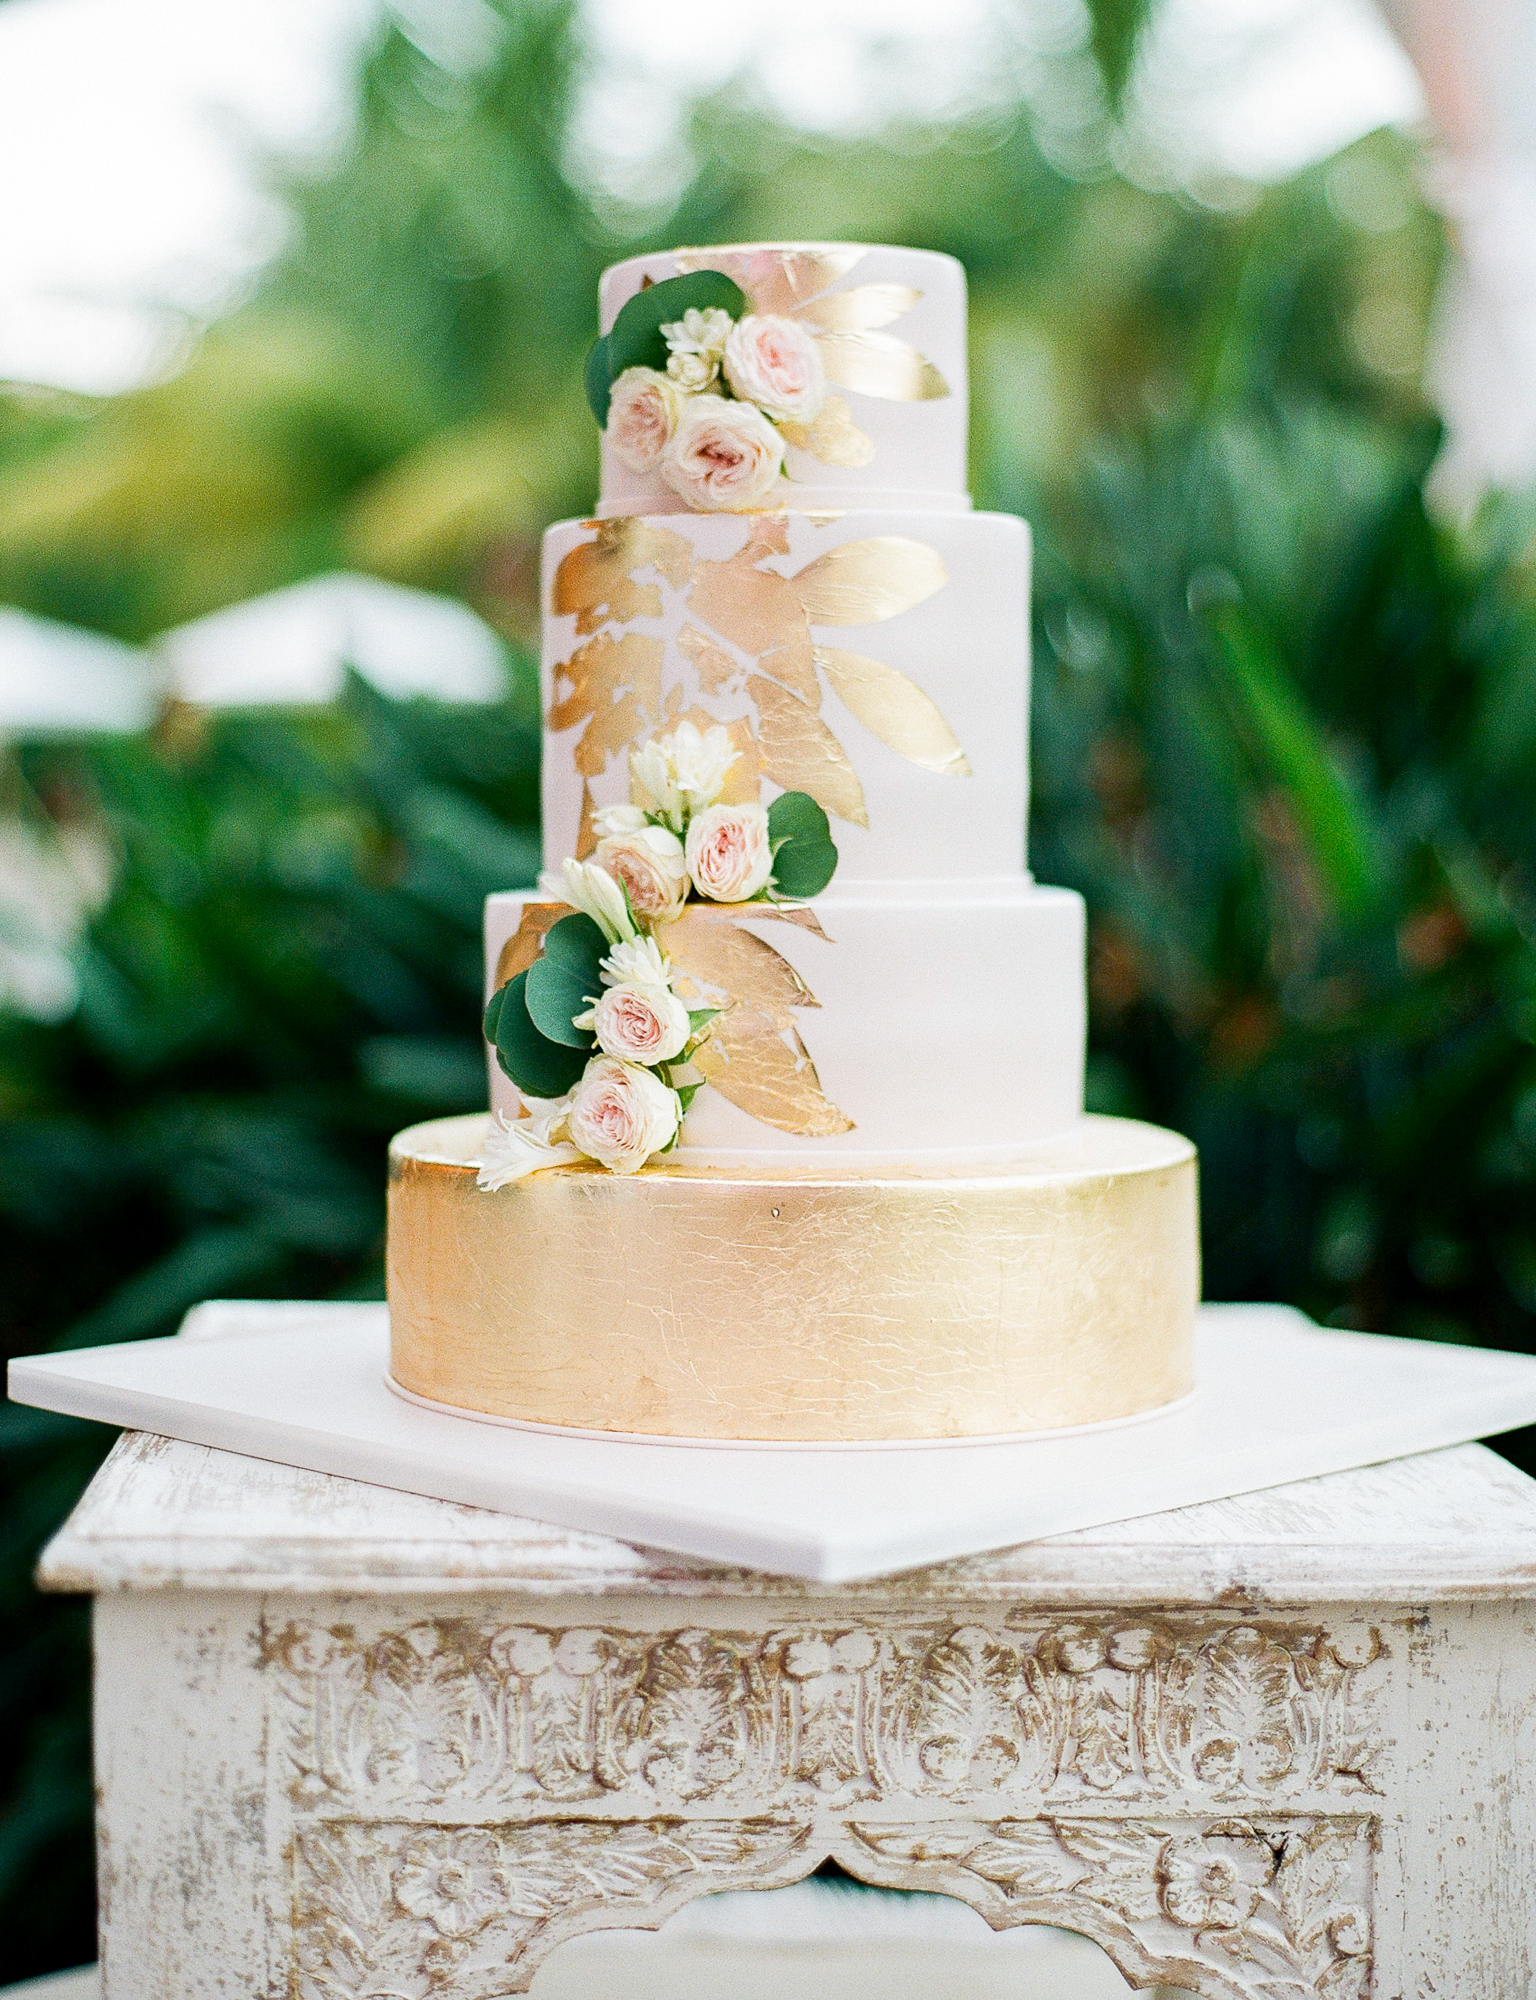 Pink and gold wedding cake. This cake was designed by Elegant Temptations and featured blush fondant, edible gold foil, and real flowers. Guests enjoyed the vanilla rum and coconut flavors